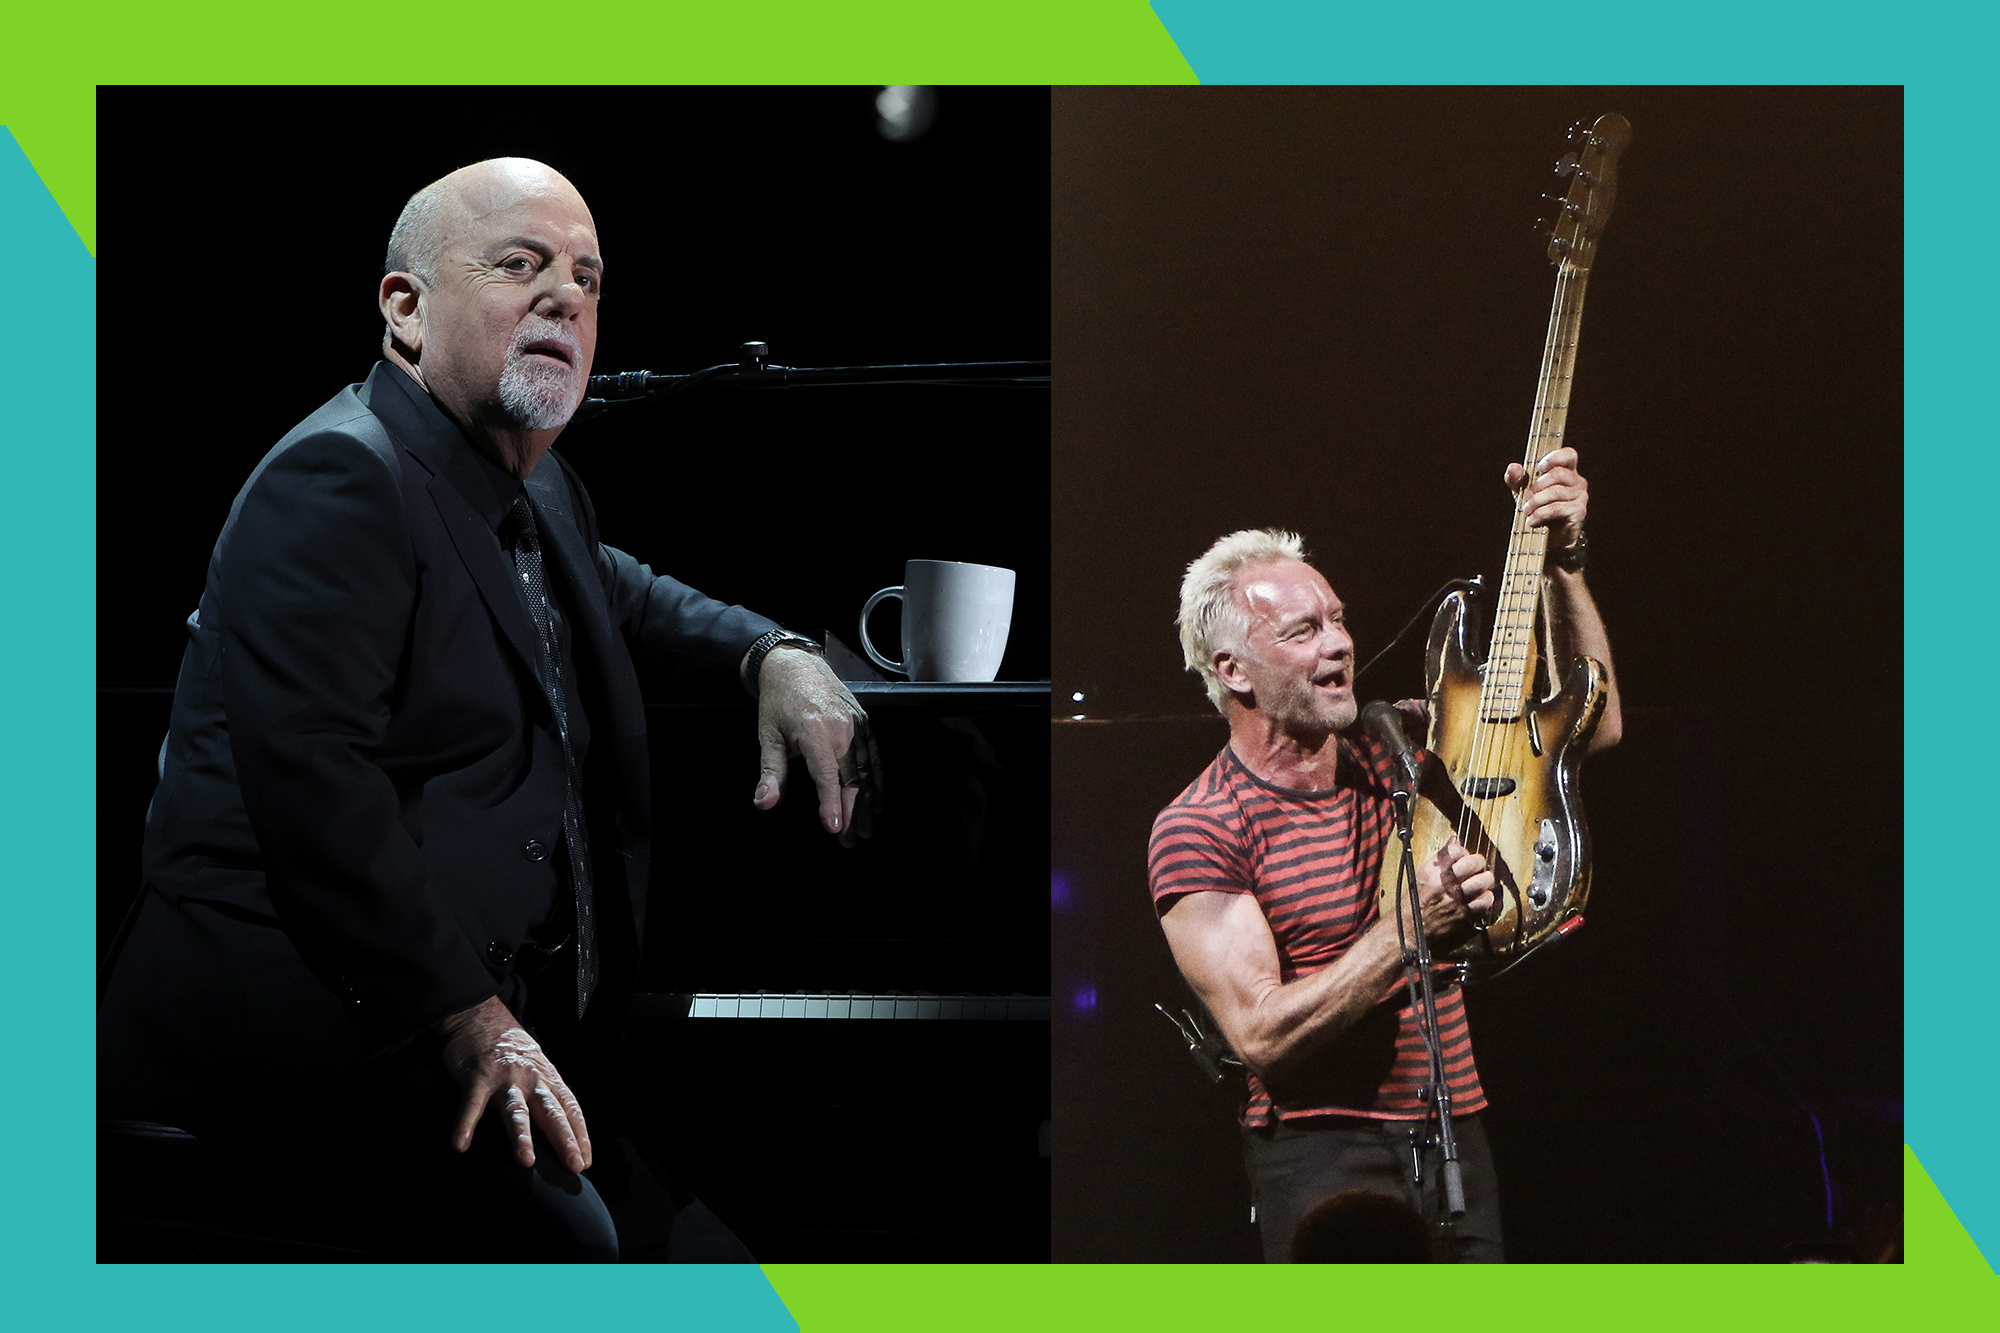 Billy Joel and Sting to play concert in Tampa. Buy tickets today